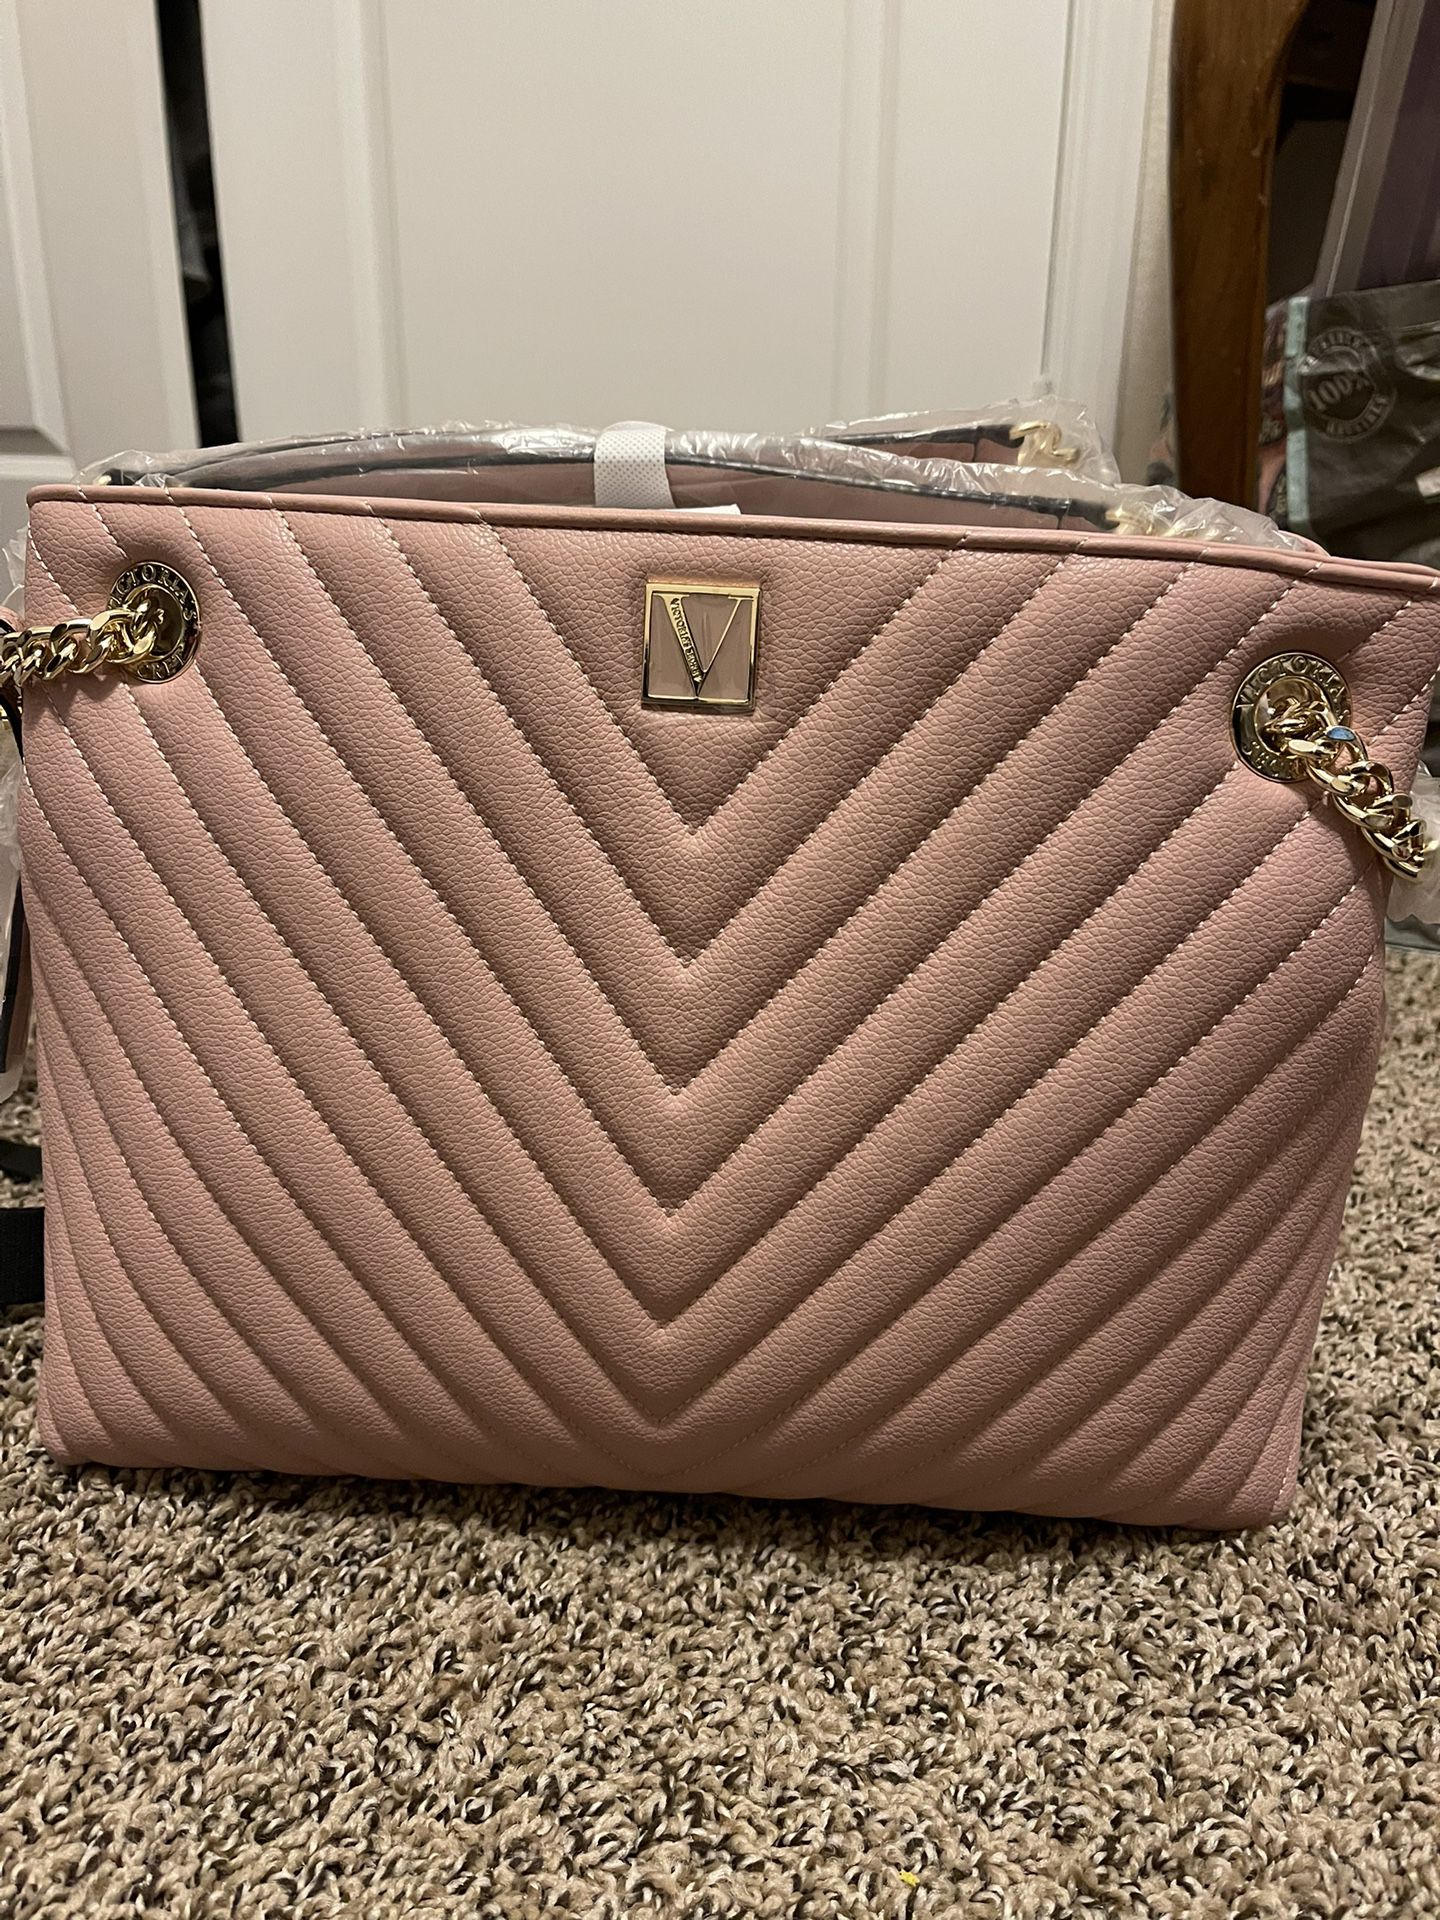 Victoria's Secret Quilted Bags & Handbags for Women for sale